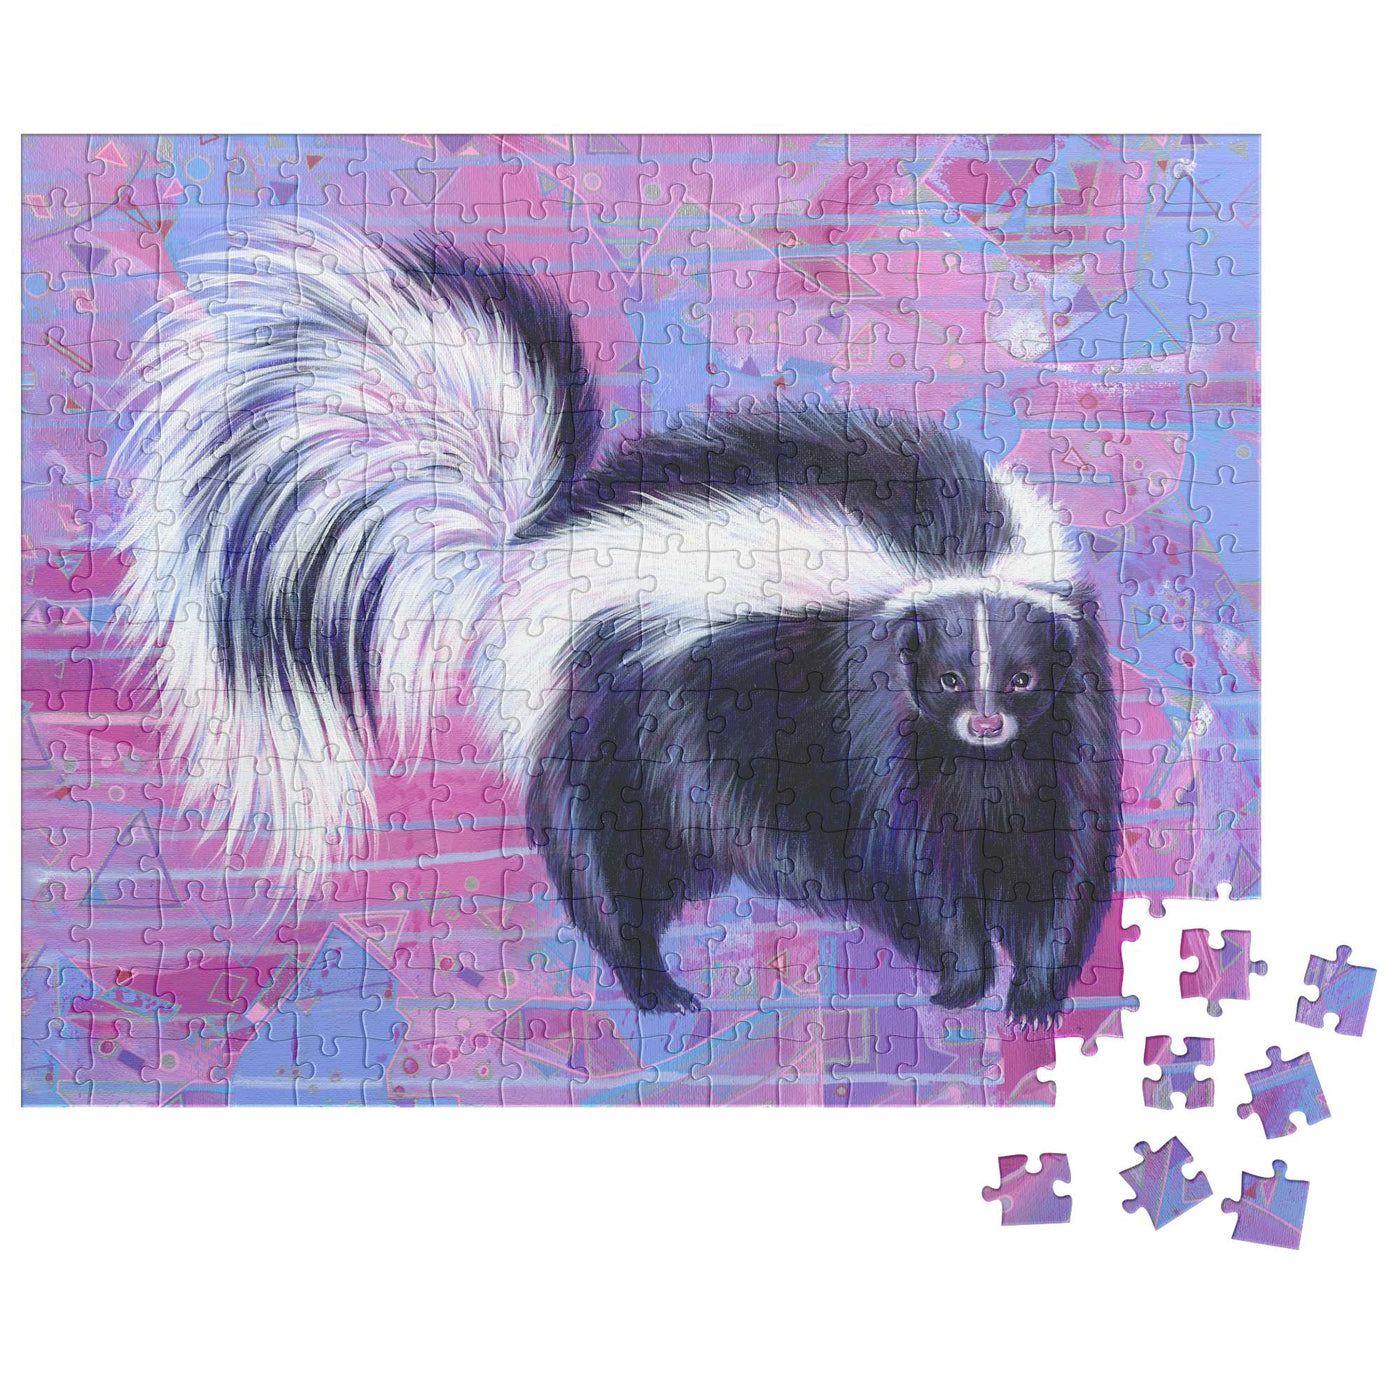 Skunk Puzzle of a skunk on a purple background, almost completed with a few pieces scattered beside it.